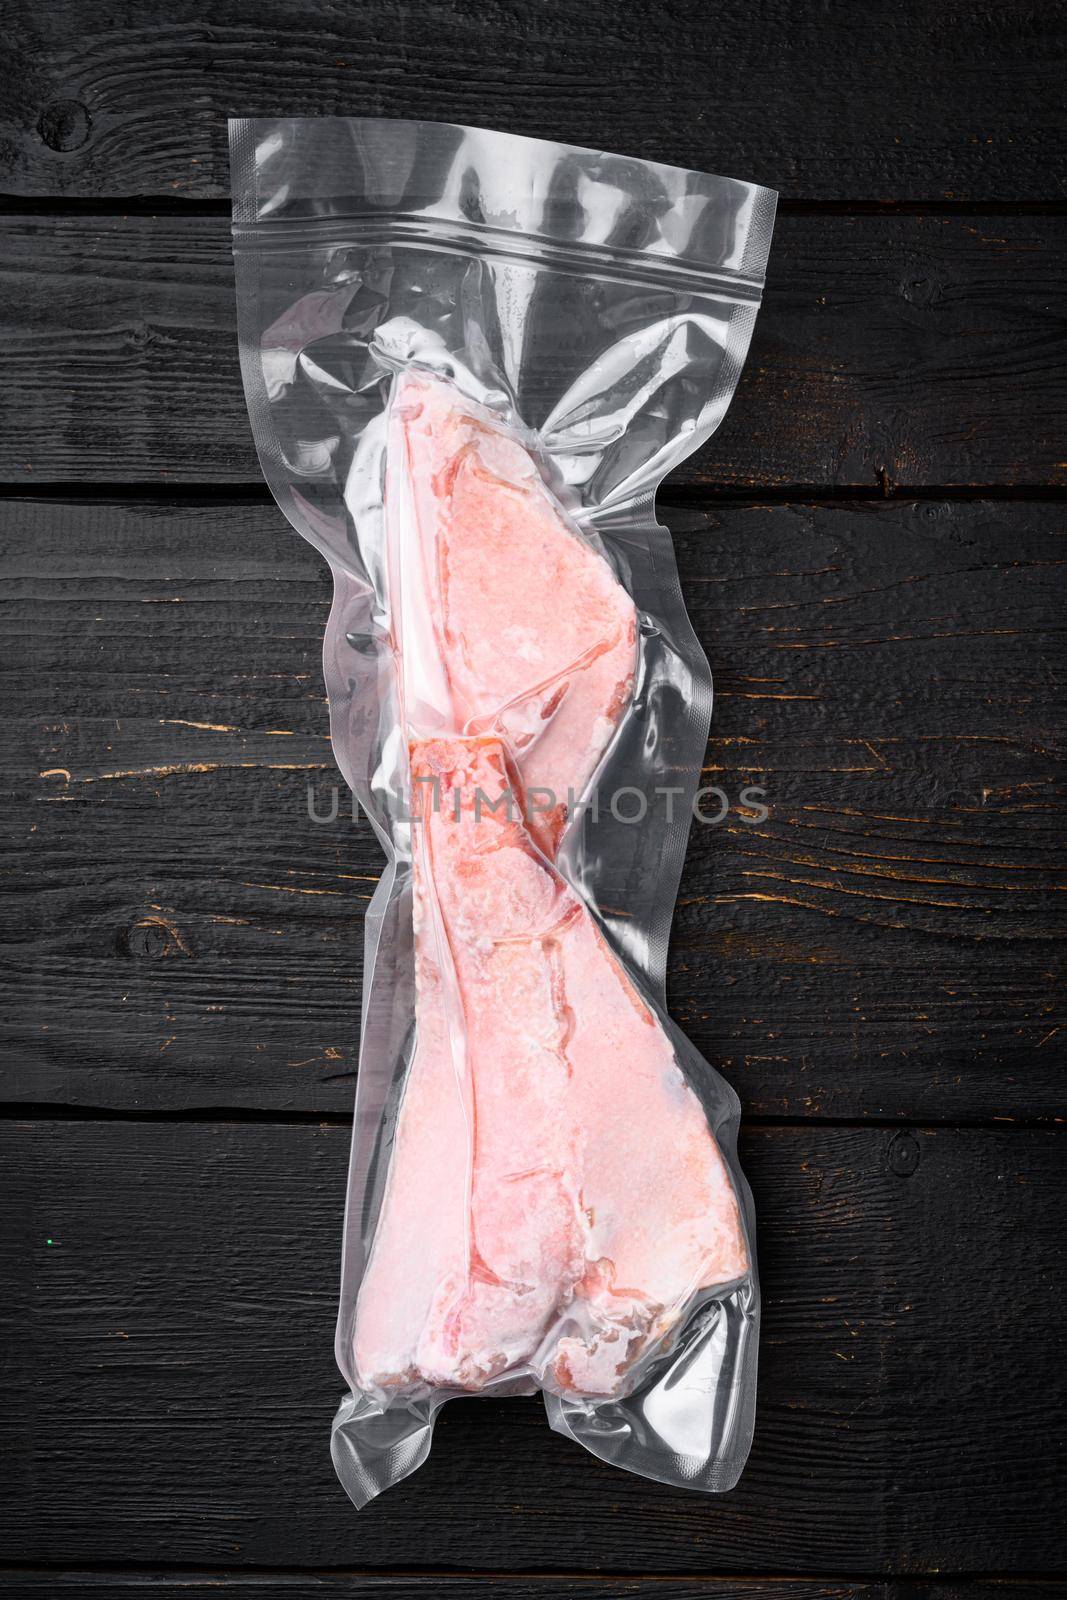 Orange roughy frozen pack fish meat set, on black wooden table background, top view flat lay